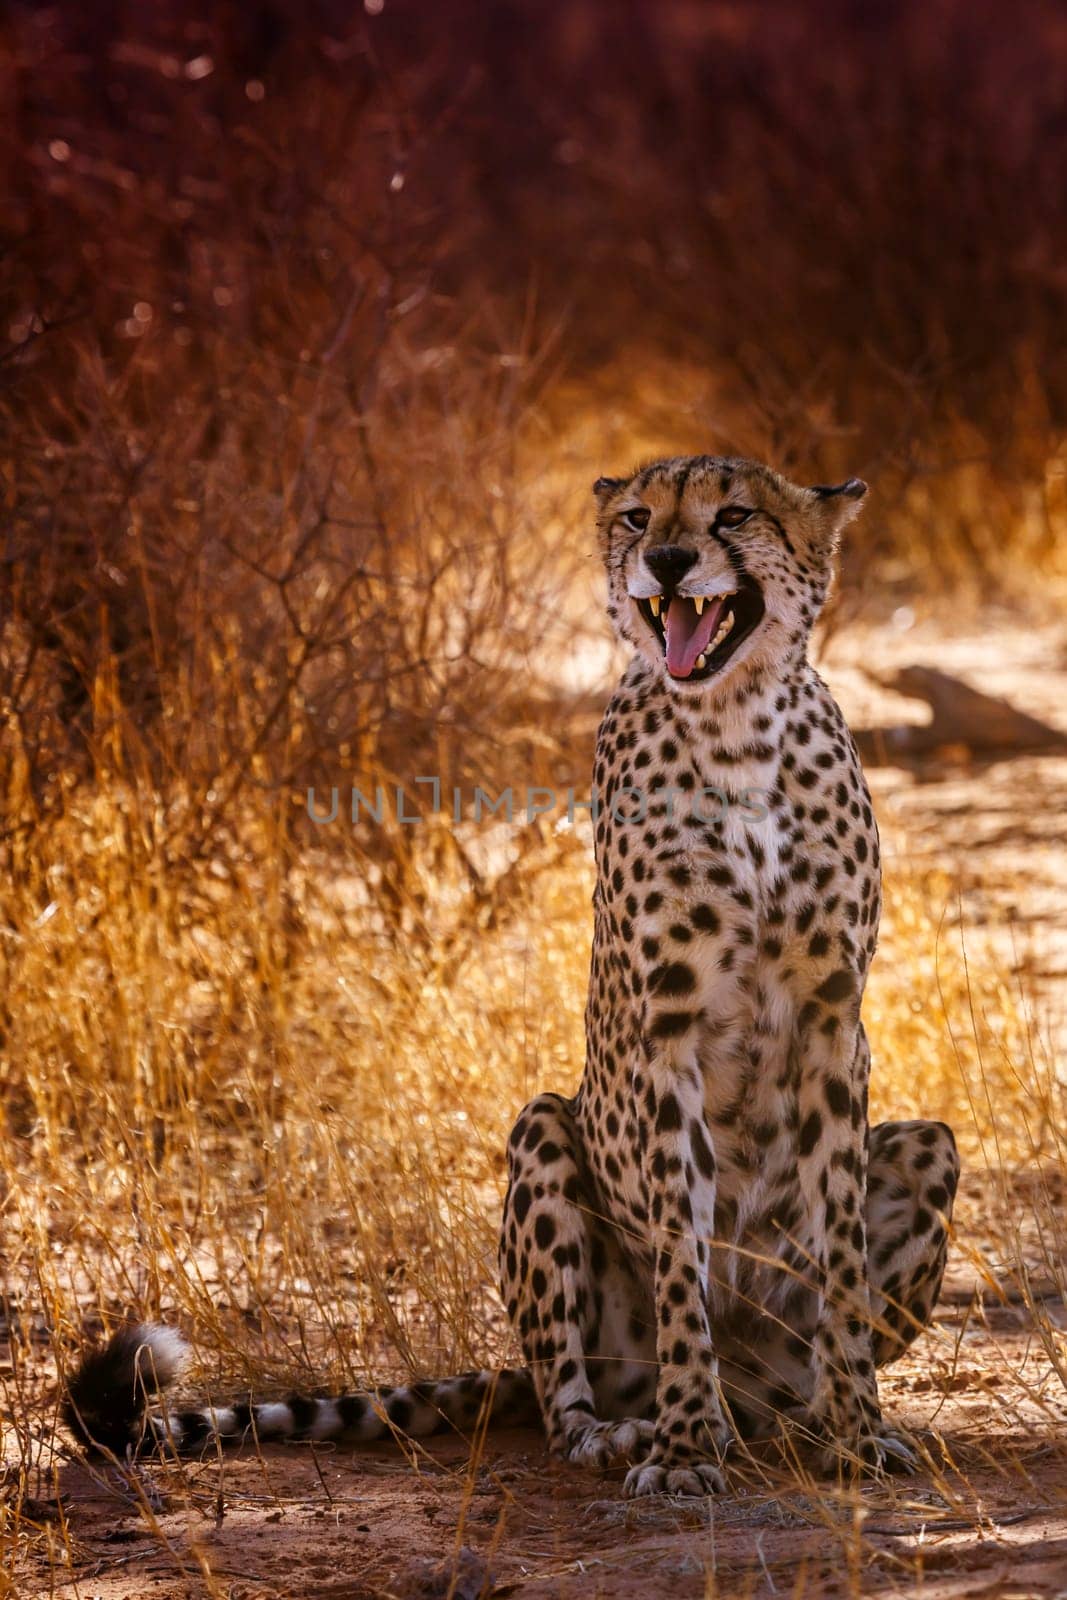 Cheetah sitting and calling front view in Kgalagadi transfrontier park, South Africa ; Specie Acinonyx jubatus family of Felidae